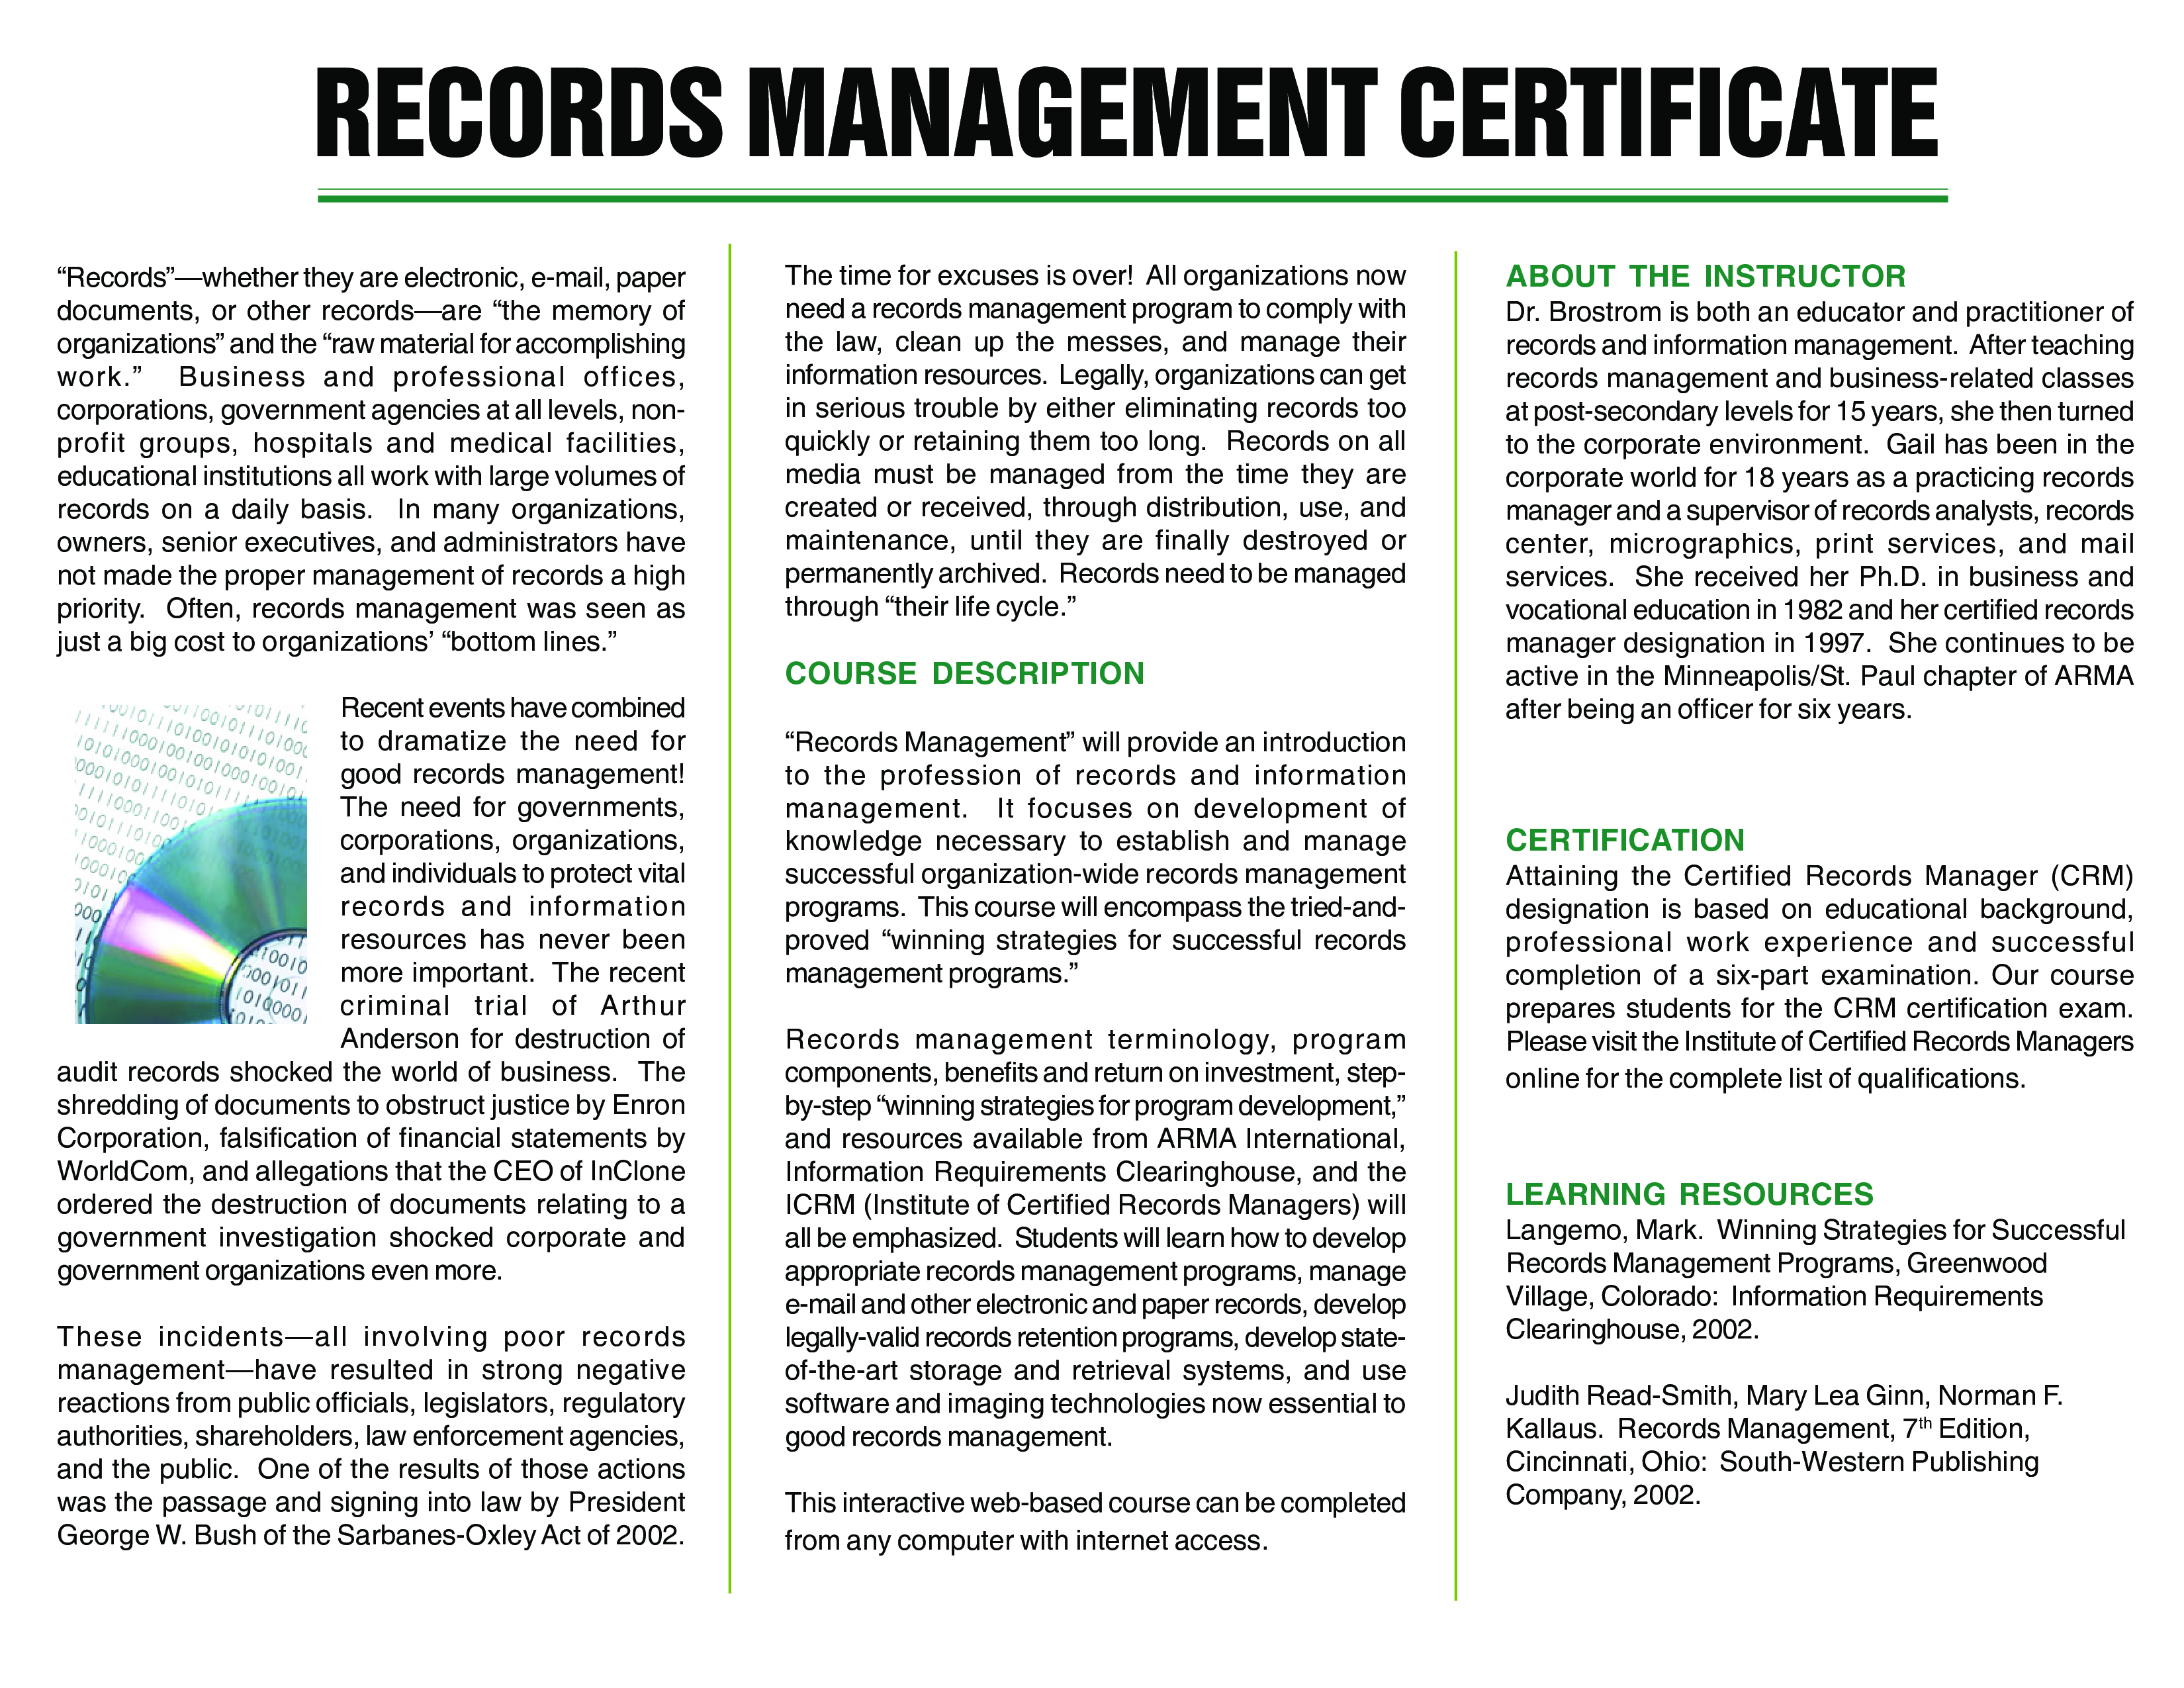 Records Management Training Certificate Templates at